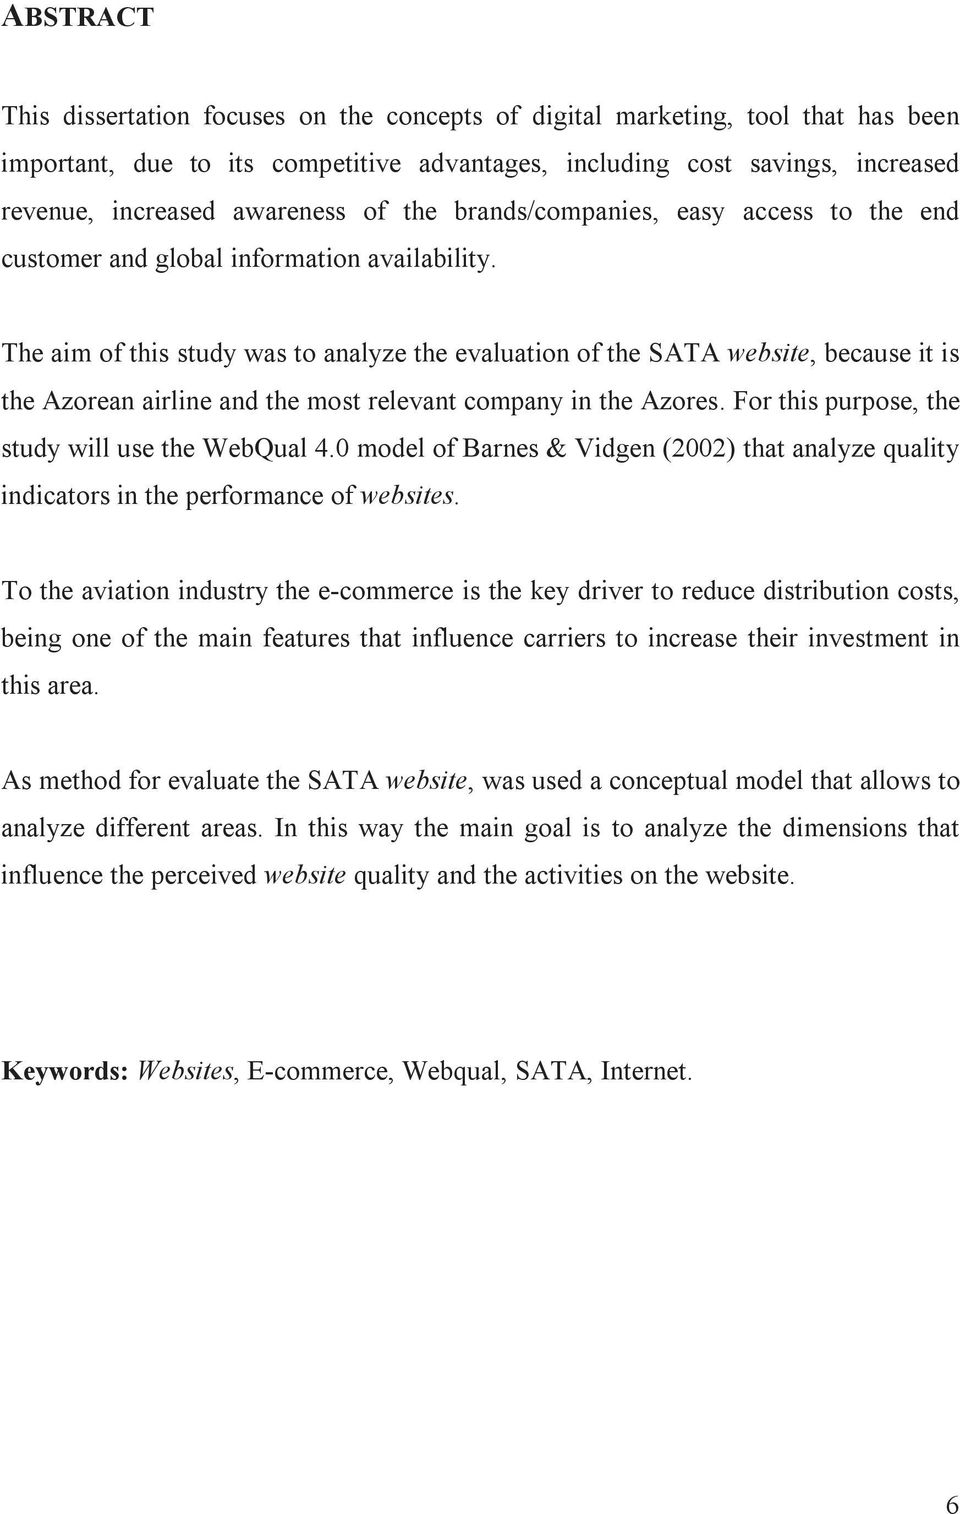 The aim of this study was to analyze the evaluation of the SATA website, because it is the Azorean airline and the most relevant company in the Azores.